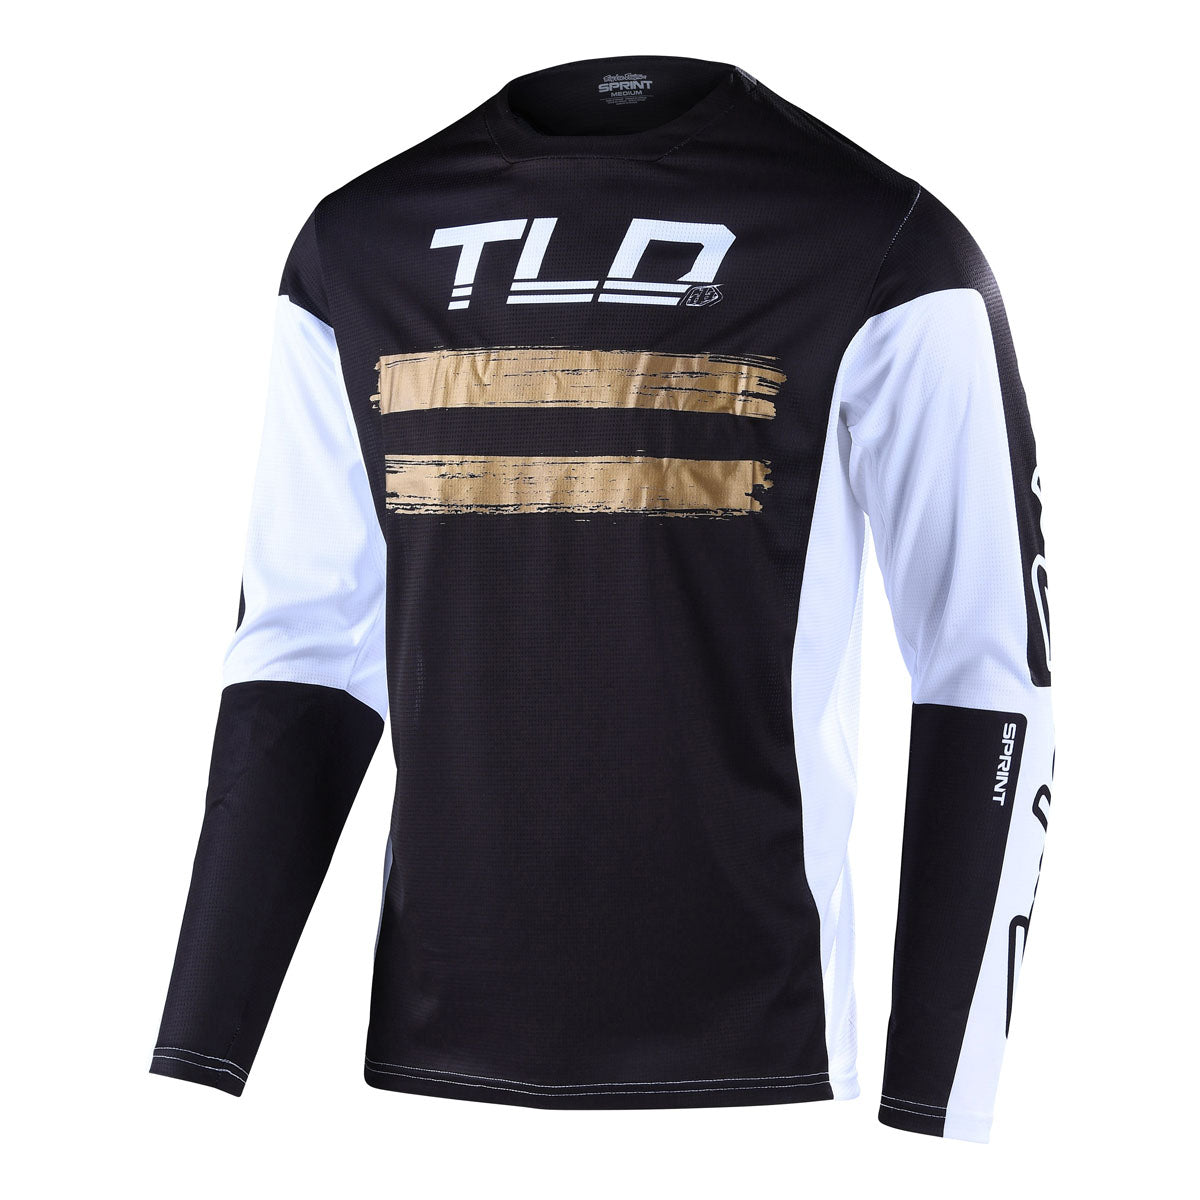 Troy Lee Designs Sprint Jersey (CLOSEOUT) - Marker Black / Copper